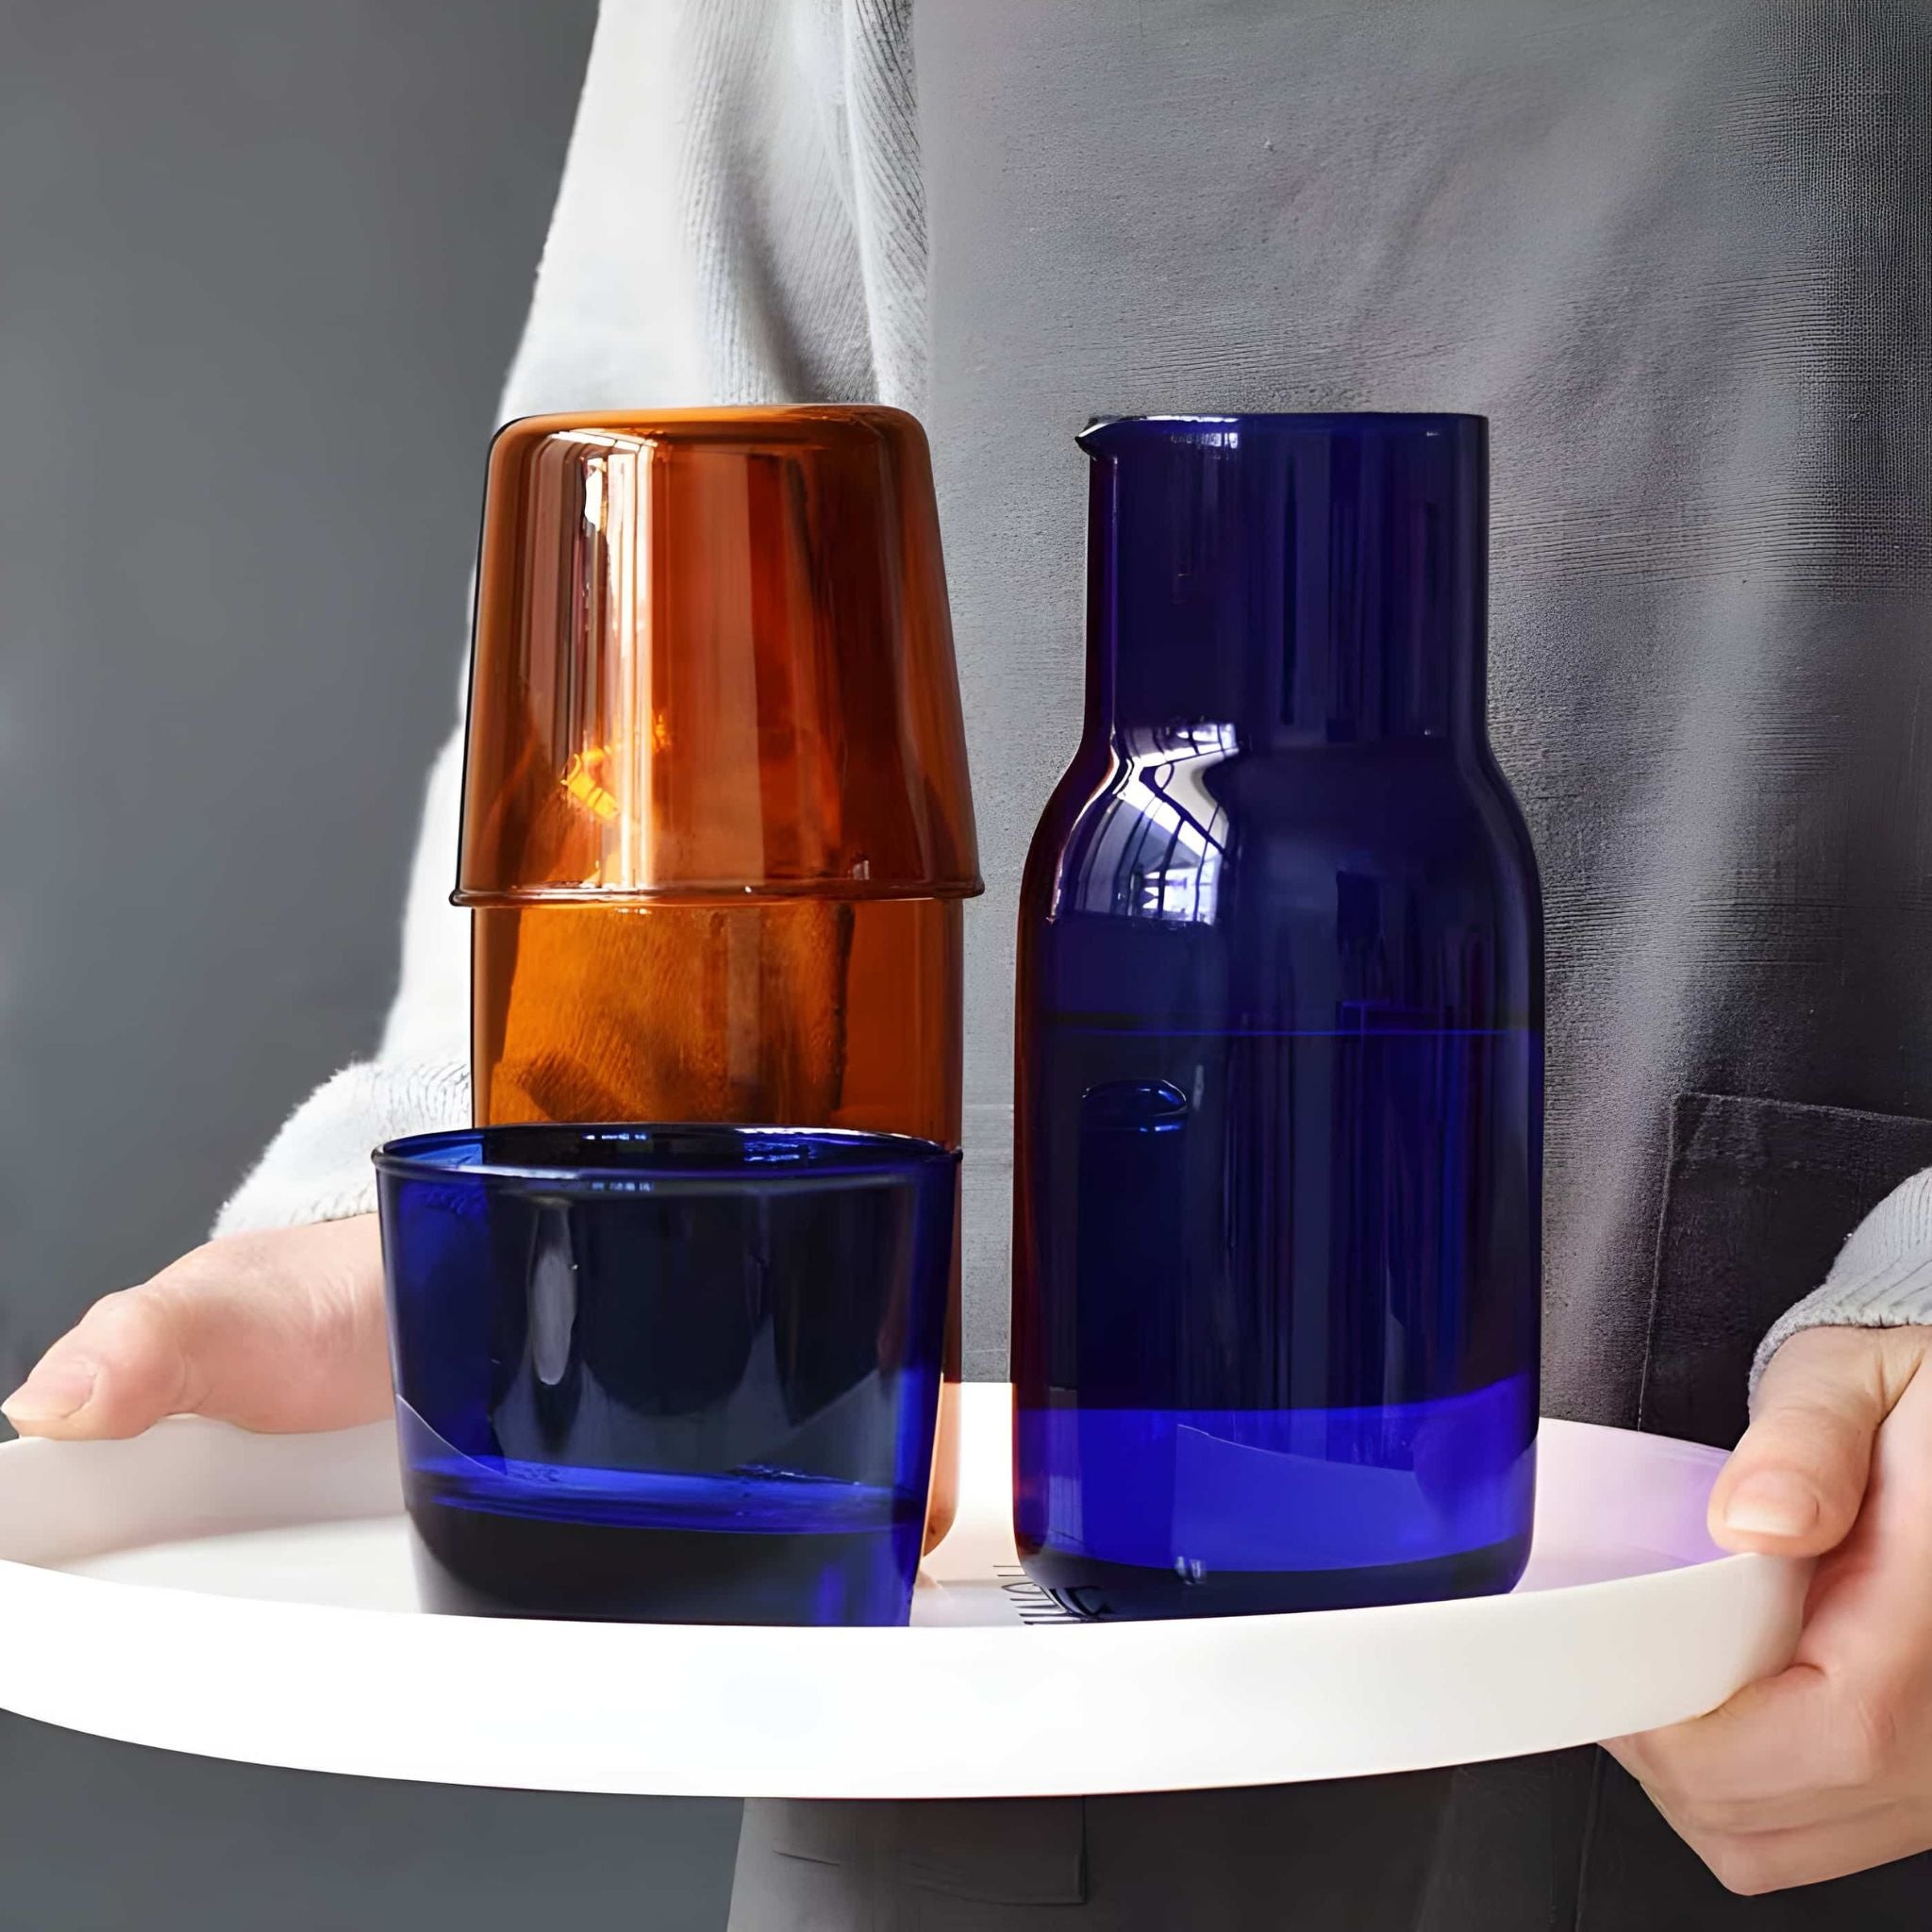 glass and carafe set group creative homewares on tray